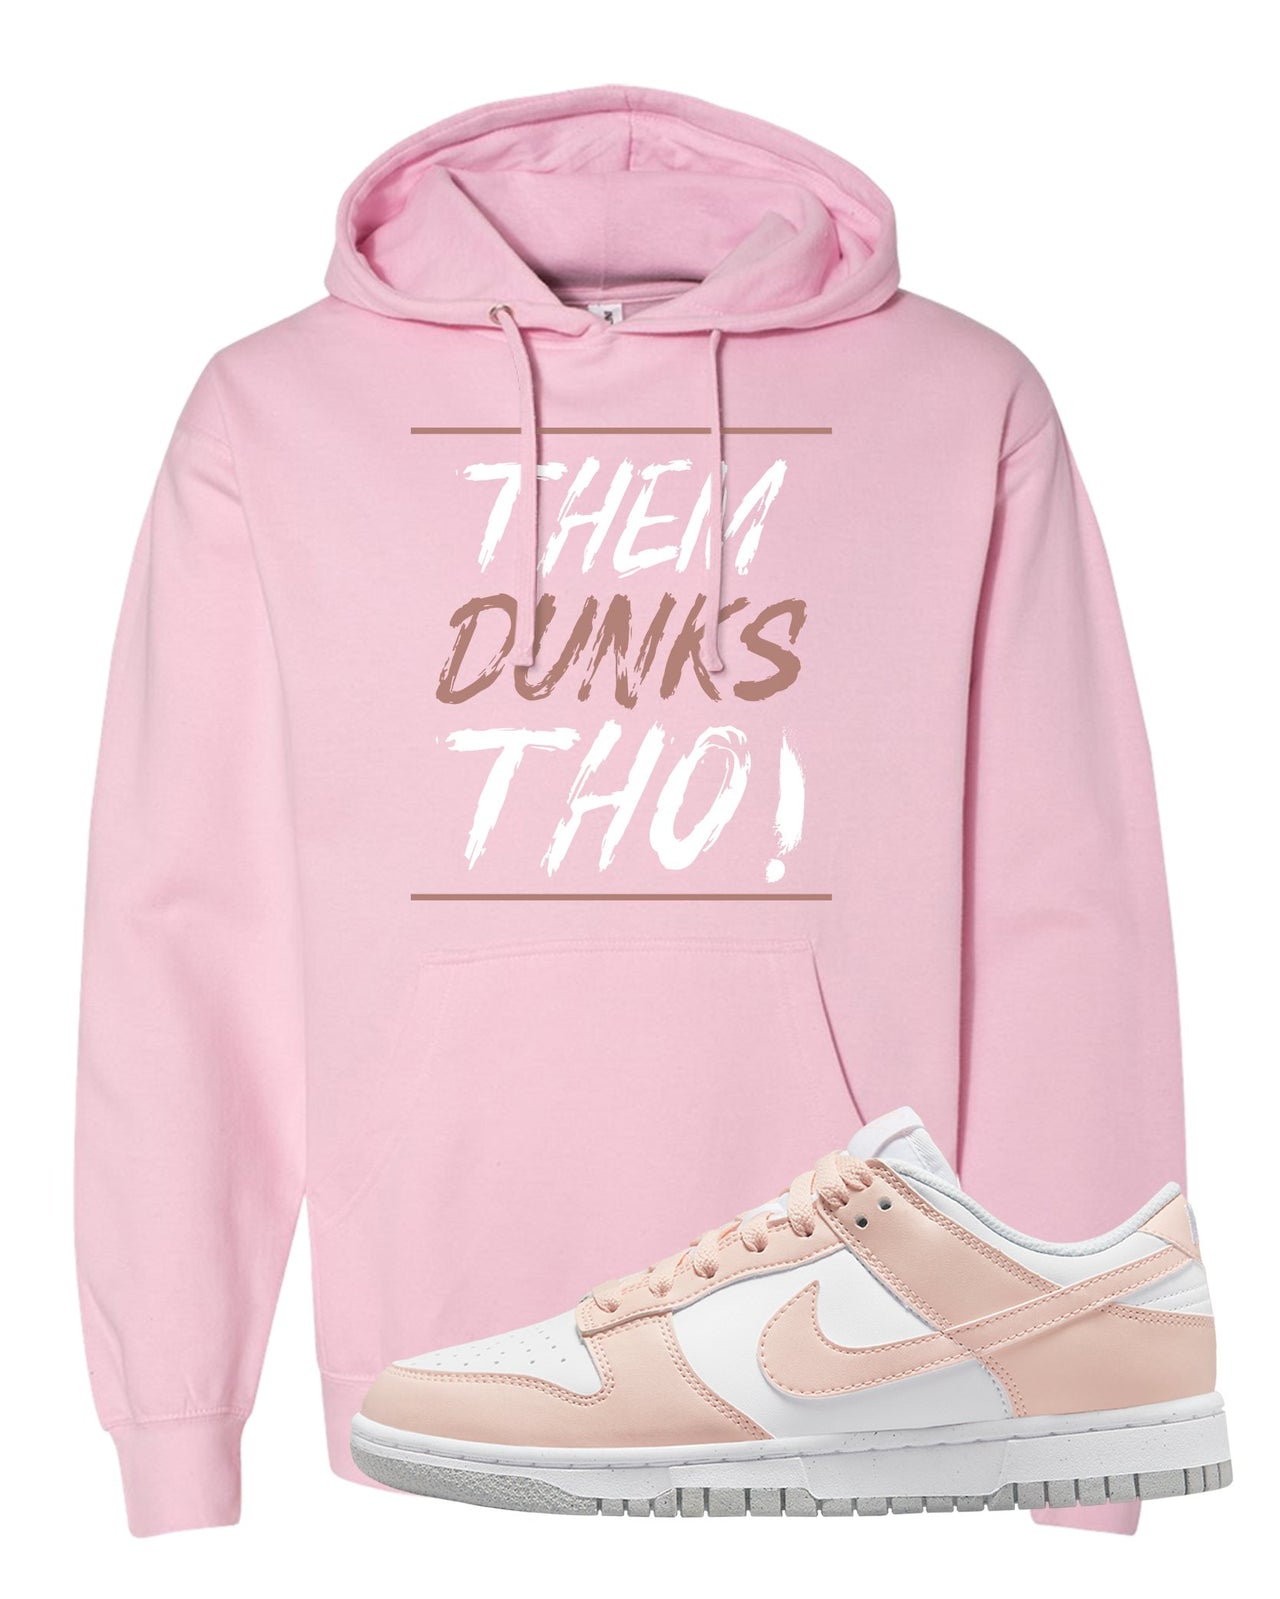 Next Nature Pale Citrus Low Dunks Hoodie | Them Dunks Tho, Light Pink